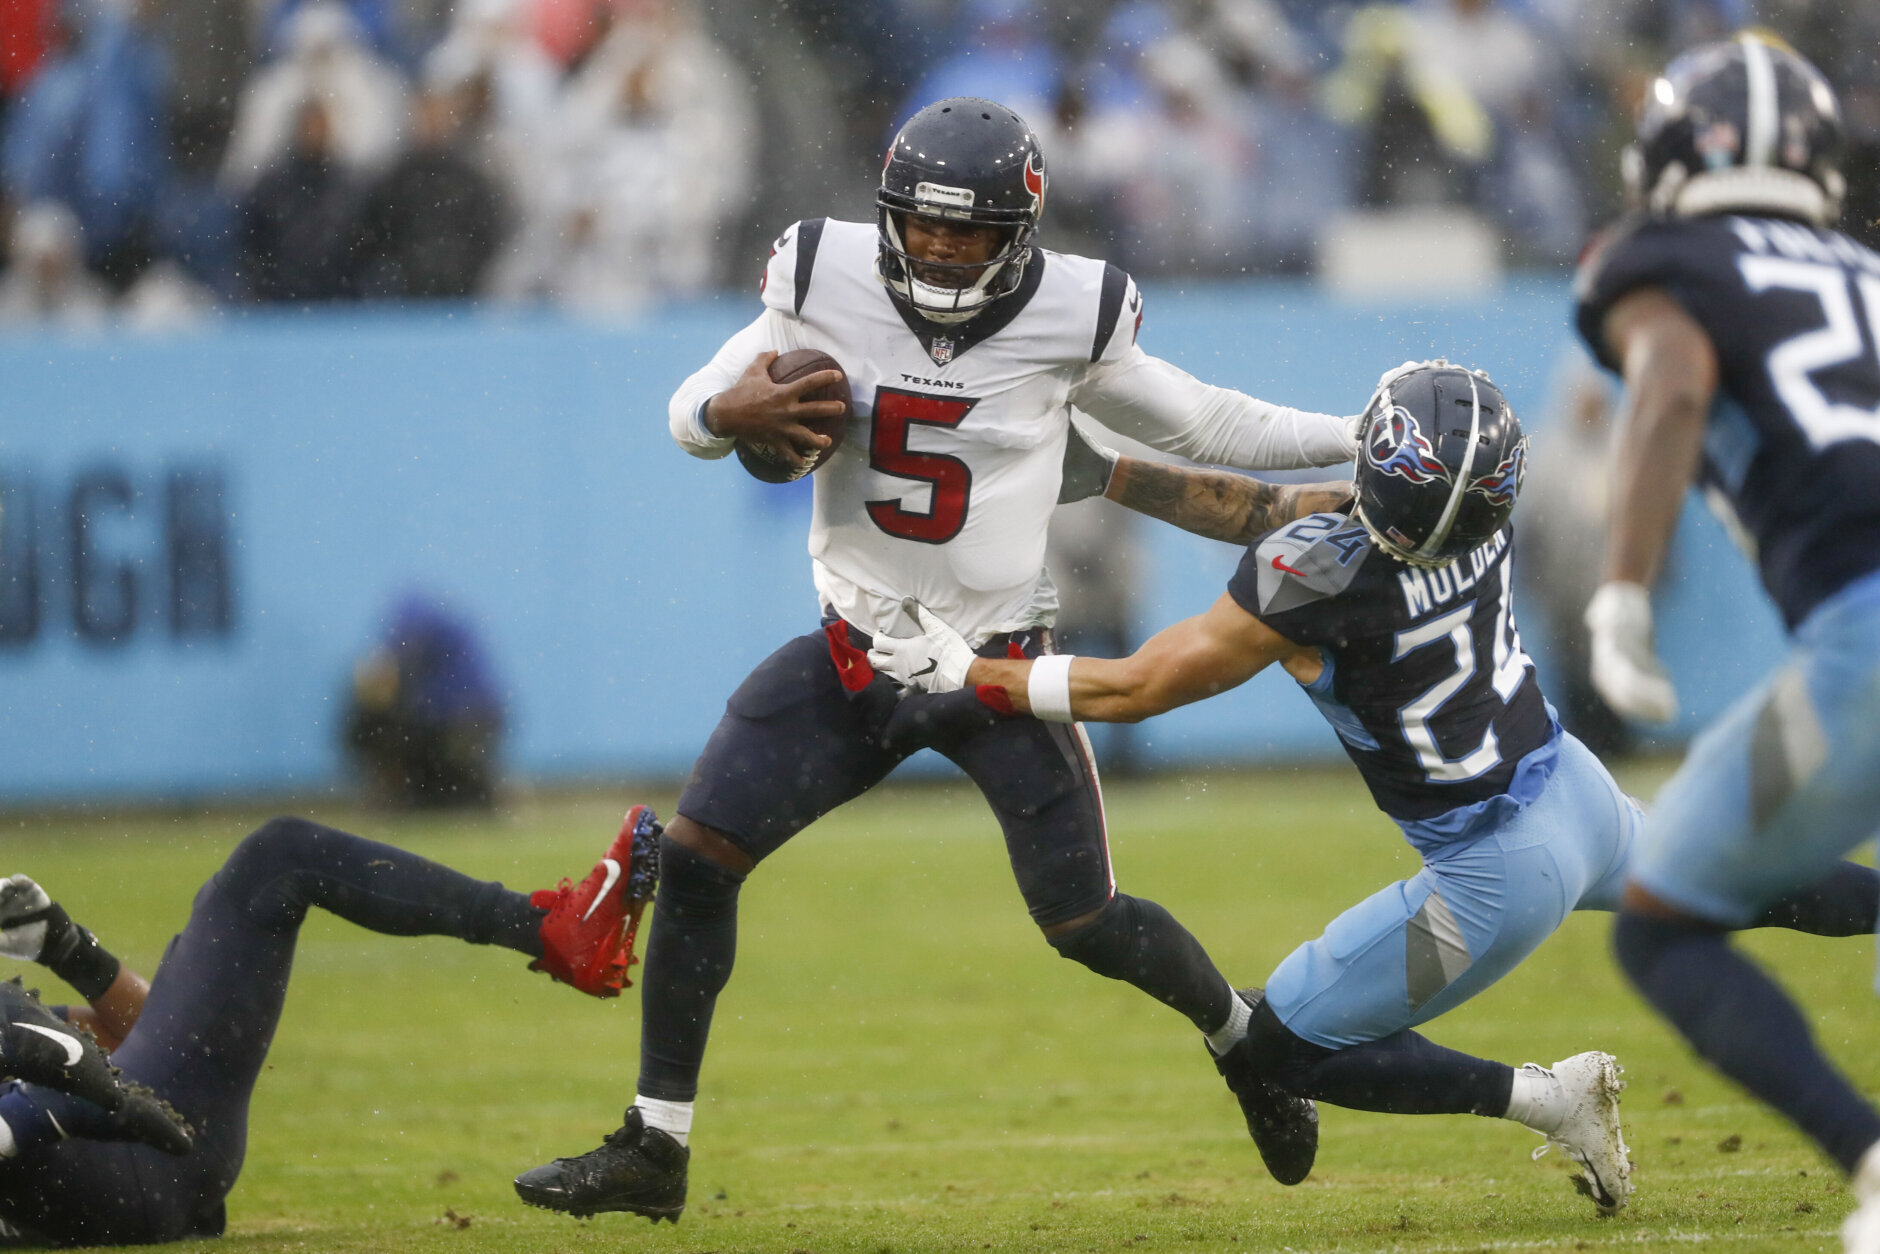 <p><em><strong>Texans 22</strong></em><br />
<em><strong>Titans 13</strong></em></p>
<p>Memo to Tennessee: <a href="https://profootballtalk.nbcsports.com/2021/11/16/titans-are-an-unprecedented-7-0-through-10-games-against-last-years-playoff-teams/" target="_blank" rel="noopener">Beating the good teams on your schedule with great proficiency</a> doesn&#8217;t mean anything if you&#8217;re going to lay a turd against the bad teams. Losing <em>at home</em> to a team that hadn&#8217;t scored a touchdown in its last four road games, let alone win, is inexcusable for a team with Super Bowl aspirations.</p>
